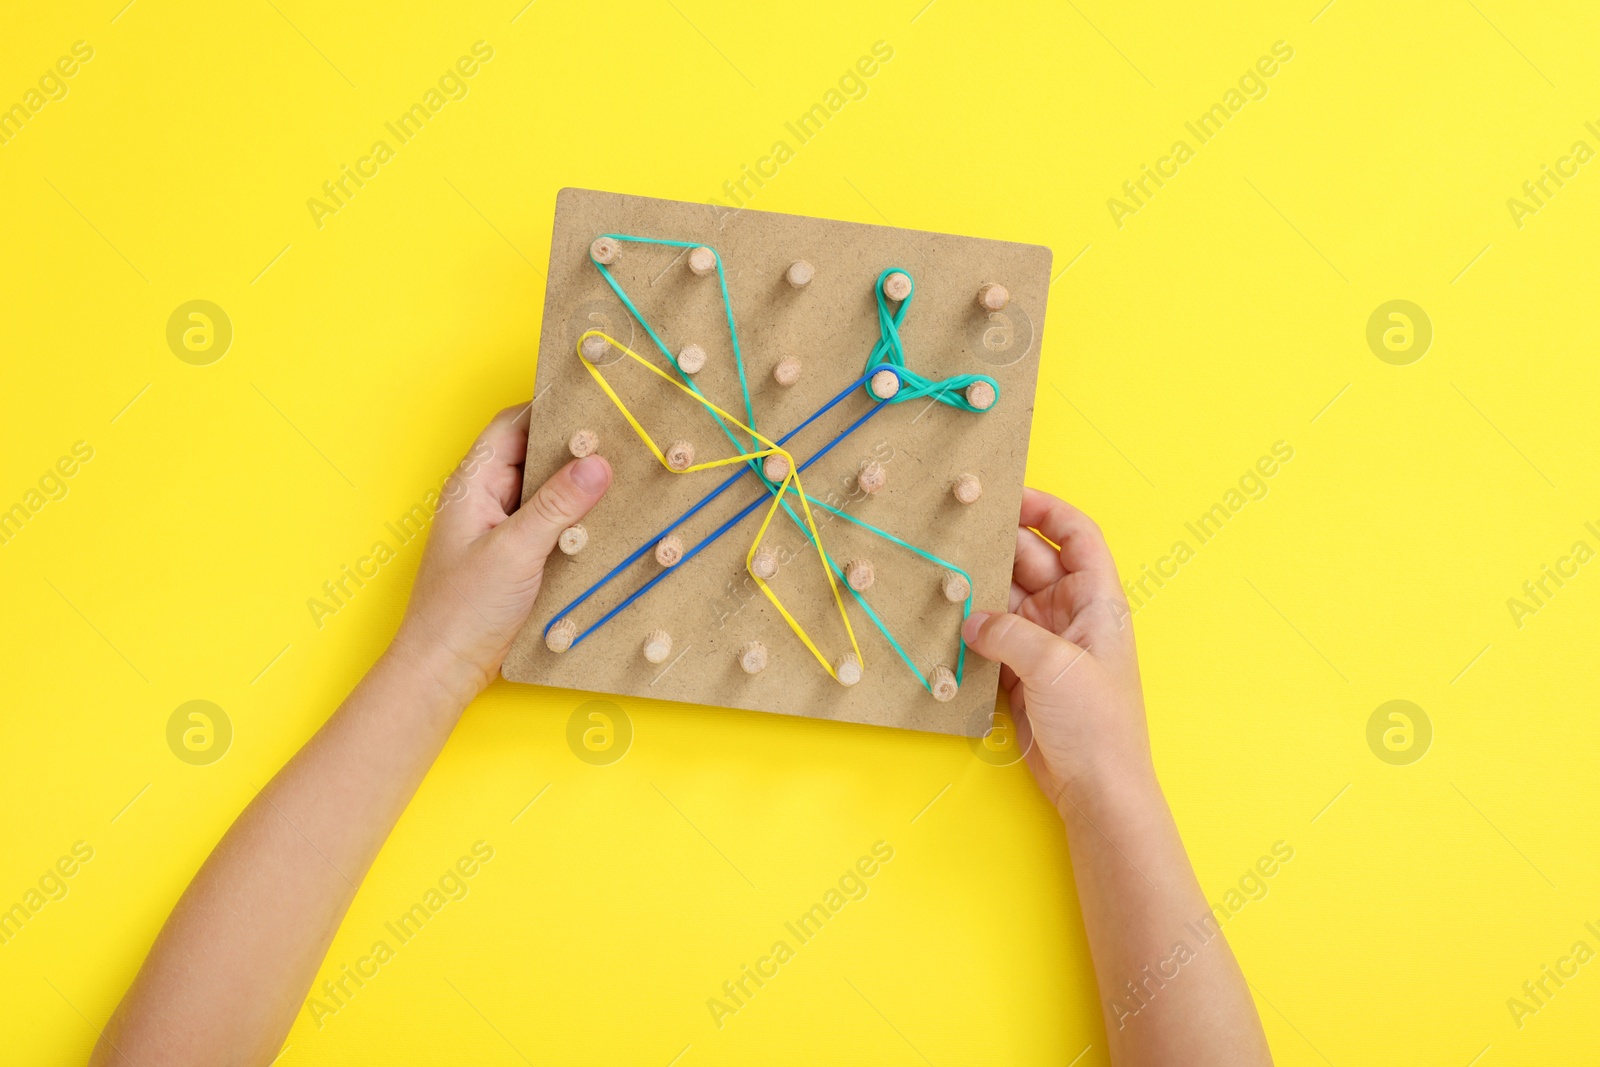 Photo of Motor skills development. Boy with geoboard and rubber bands at yellow table, top view